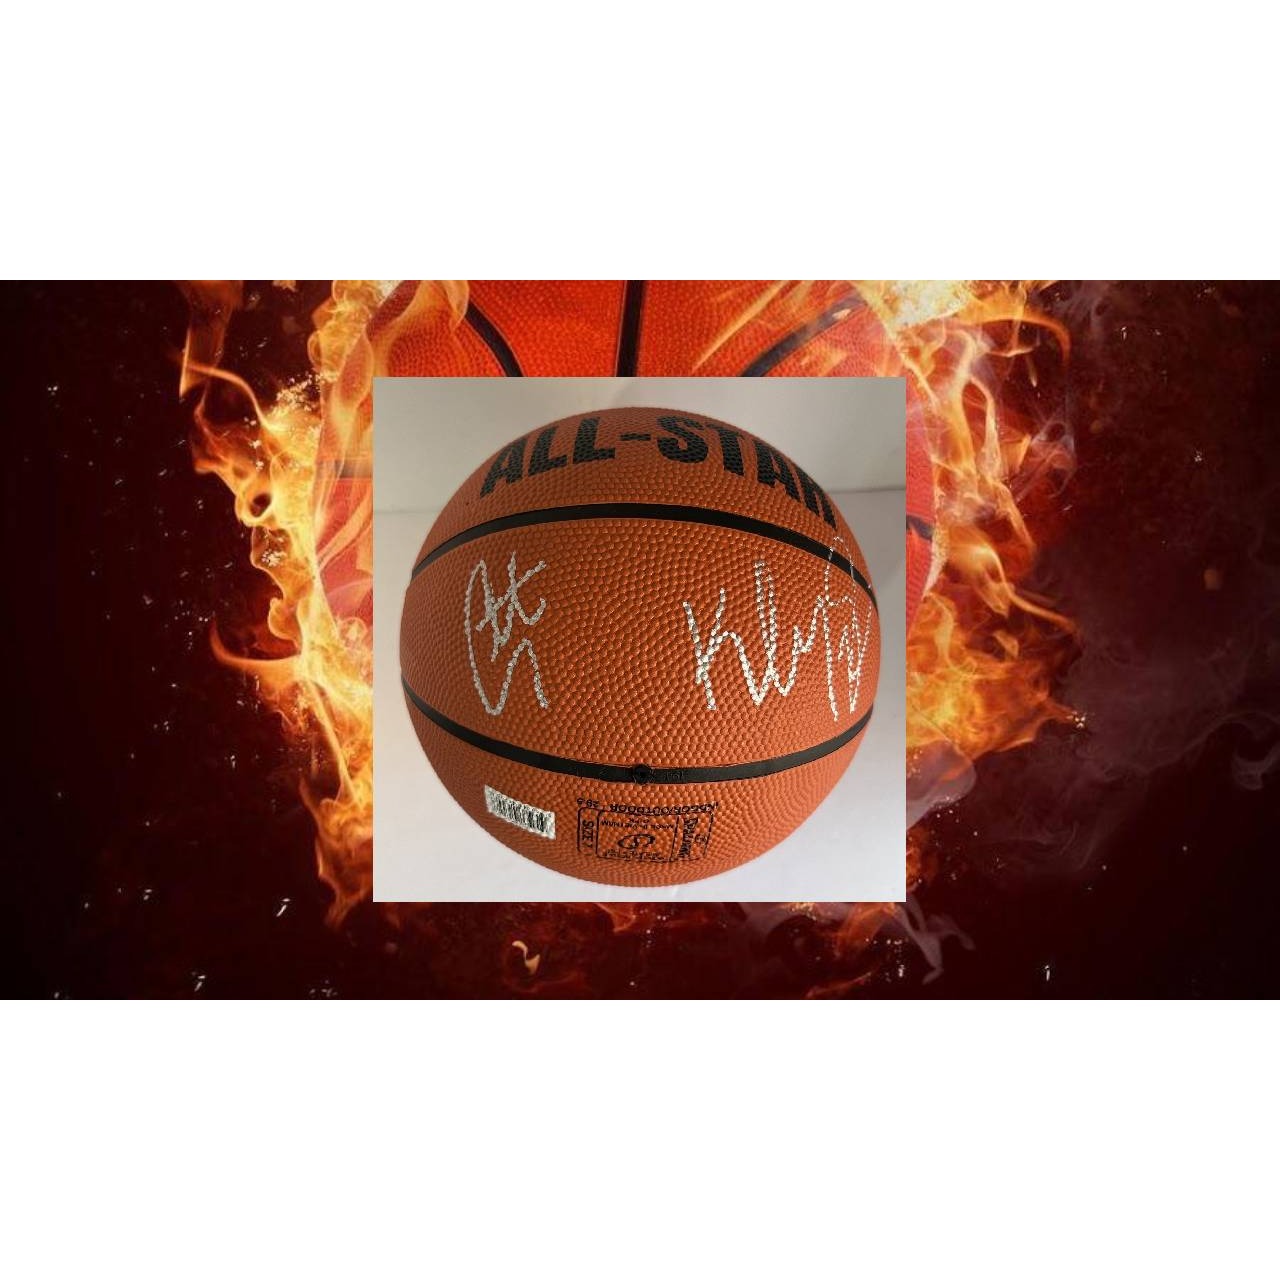 Stephen Curry and Klay Thompson Golden State Warriors NBA Spalding basketball full size signed with proof